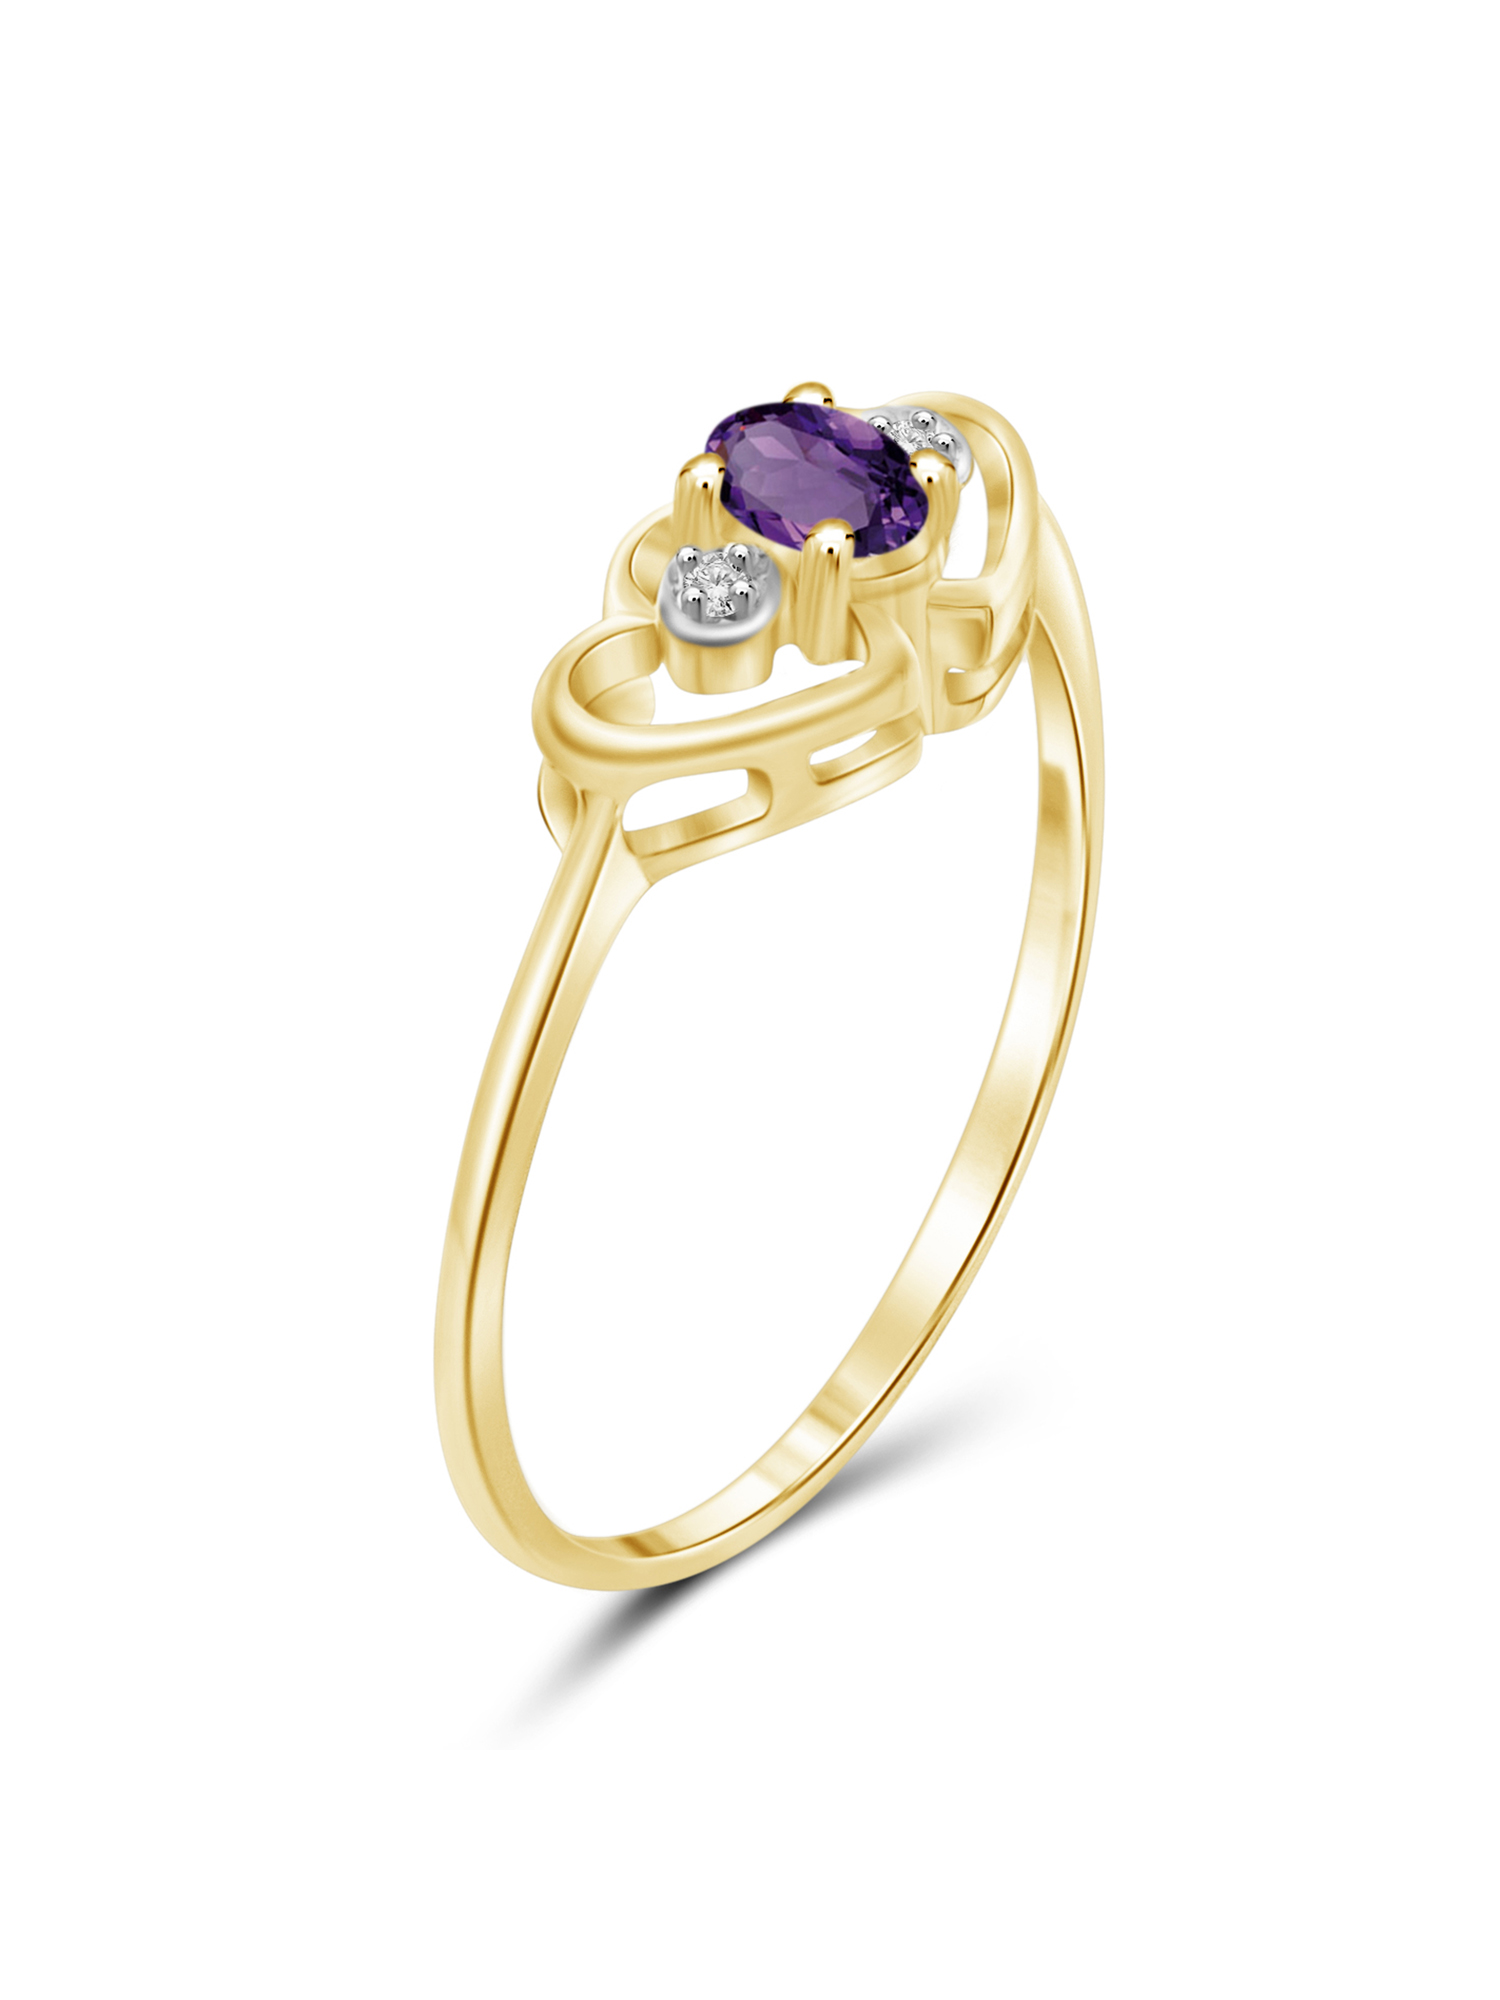 JewelersClub Amethyst Ring Birthstone Jewelry – 0.15 Carat Amethyst 14K Gold Plated Silver Ring Jewelry with White Diamond Accent – Gemstone Rings with Hypoallergenic 14K Gold Plated Silver Band - image 4 of 4